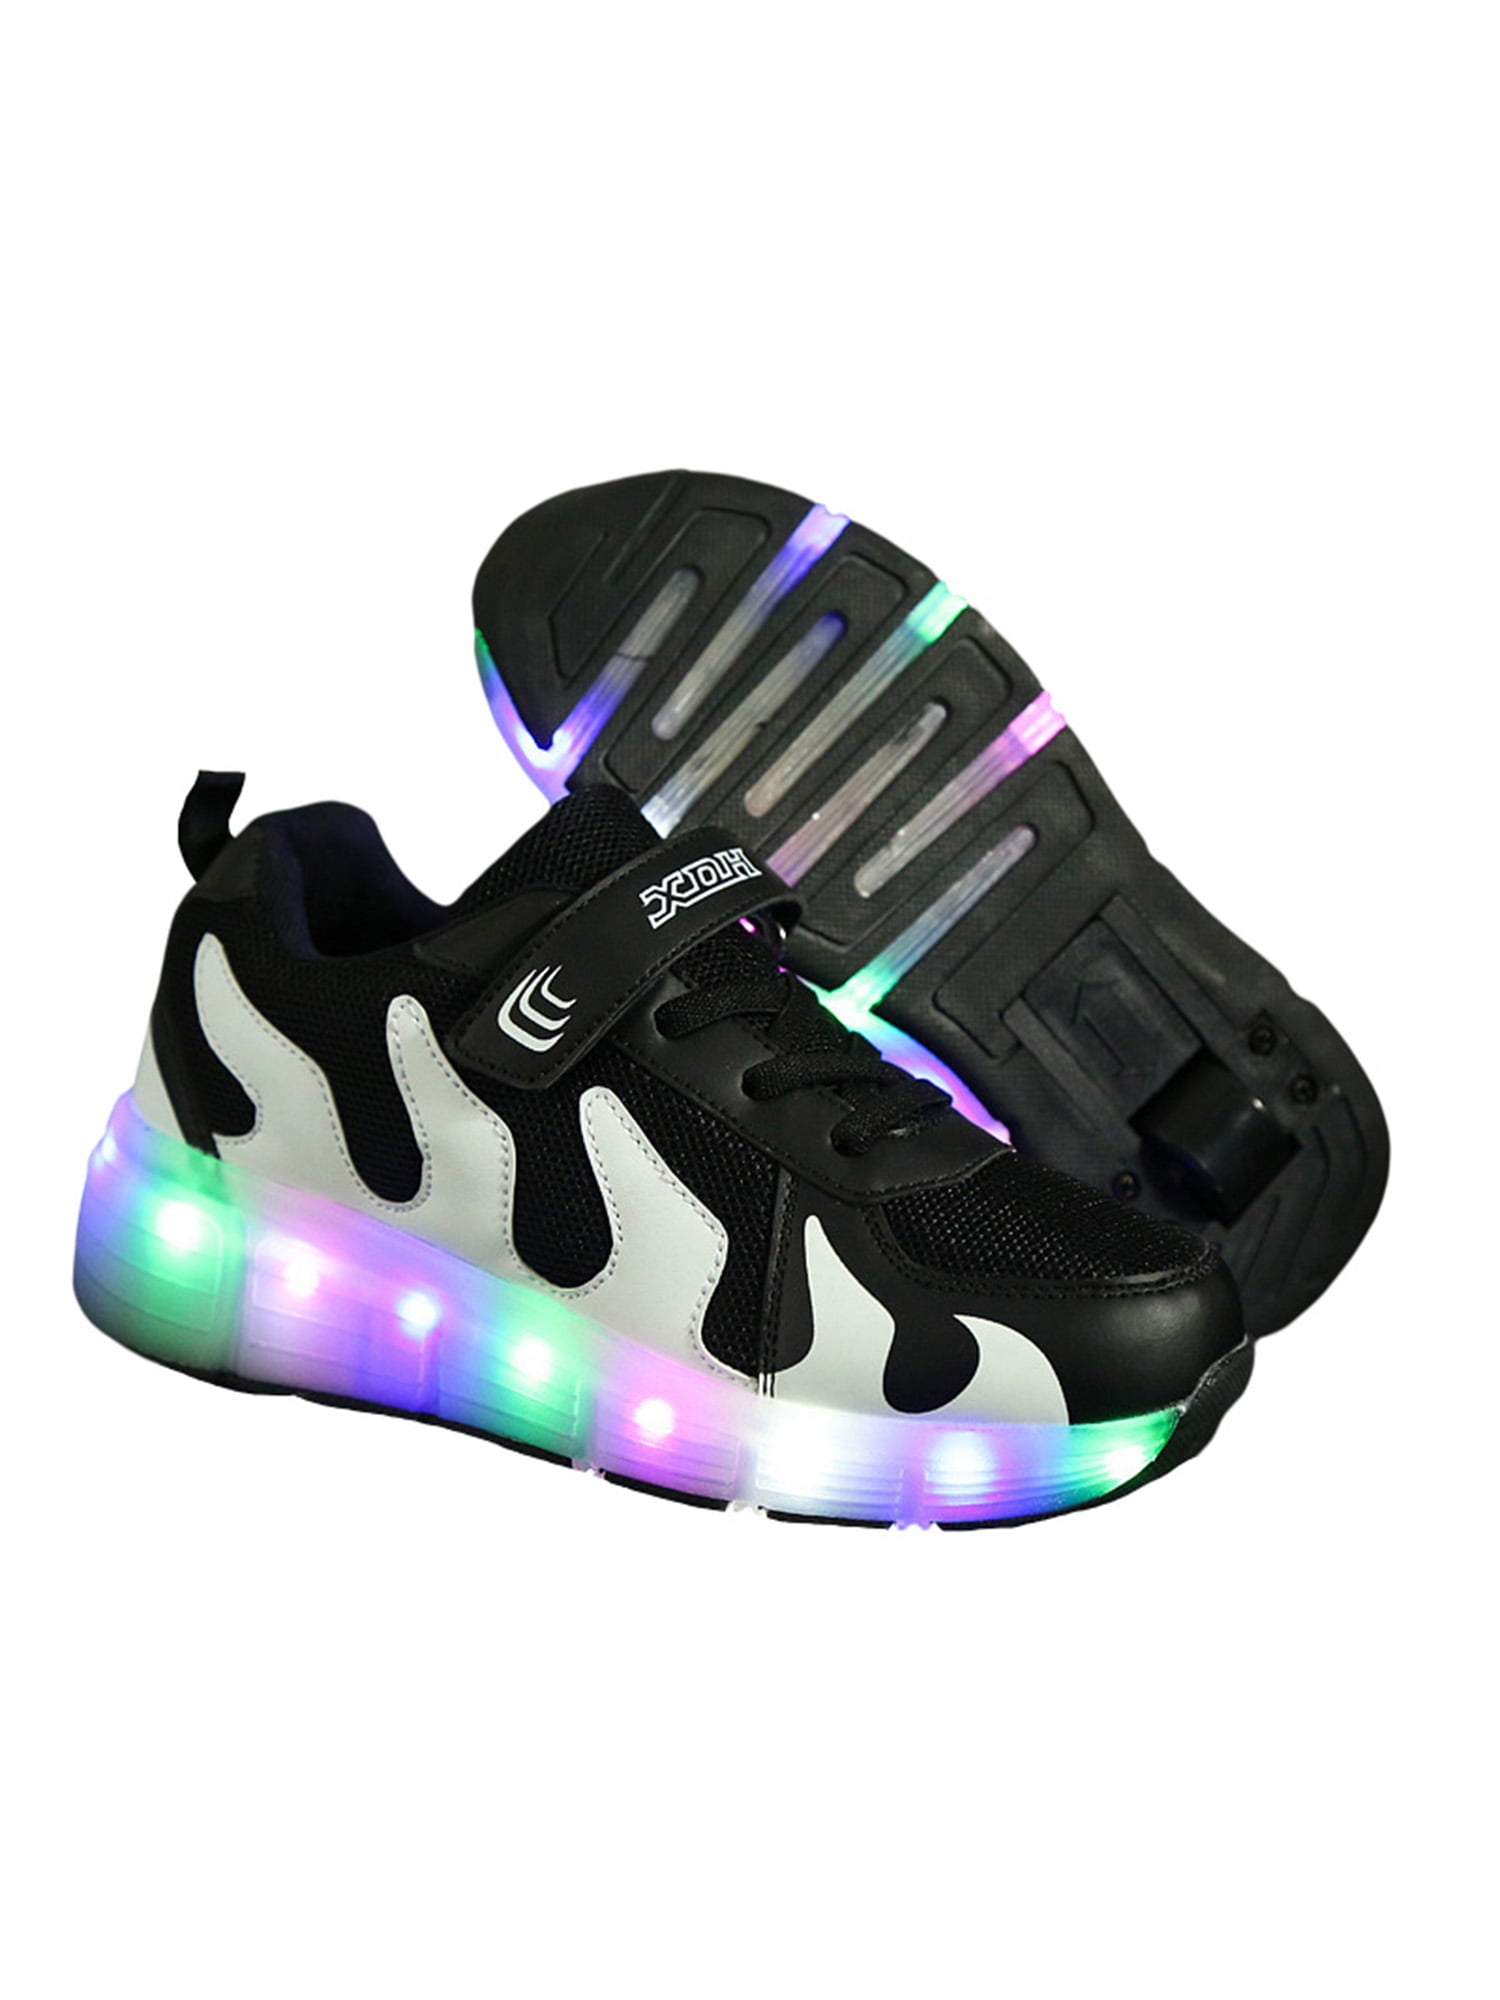 Unisex Kids Roller Skate Shoes Removable Become Sport Trainer 7 Colors Changing Upgraded Led Shoes for Boys Girls Double Wheels Shoes